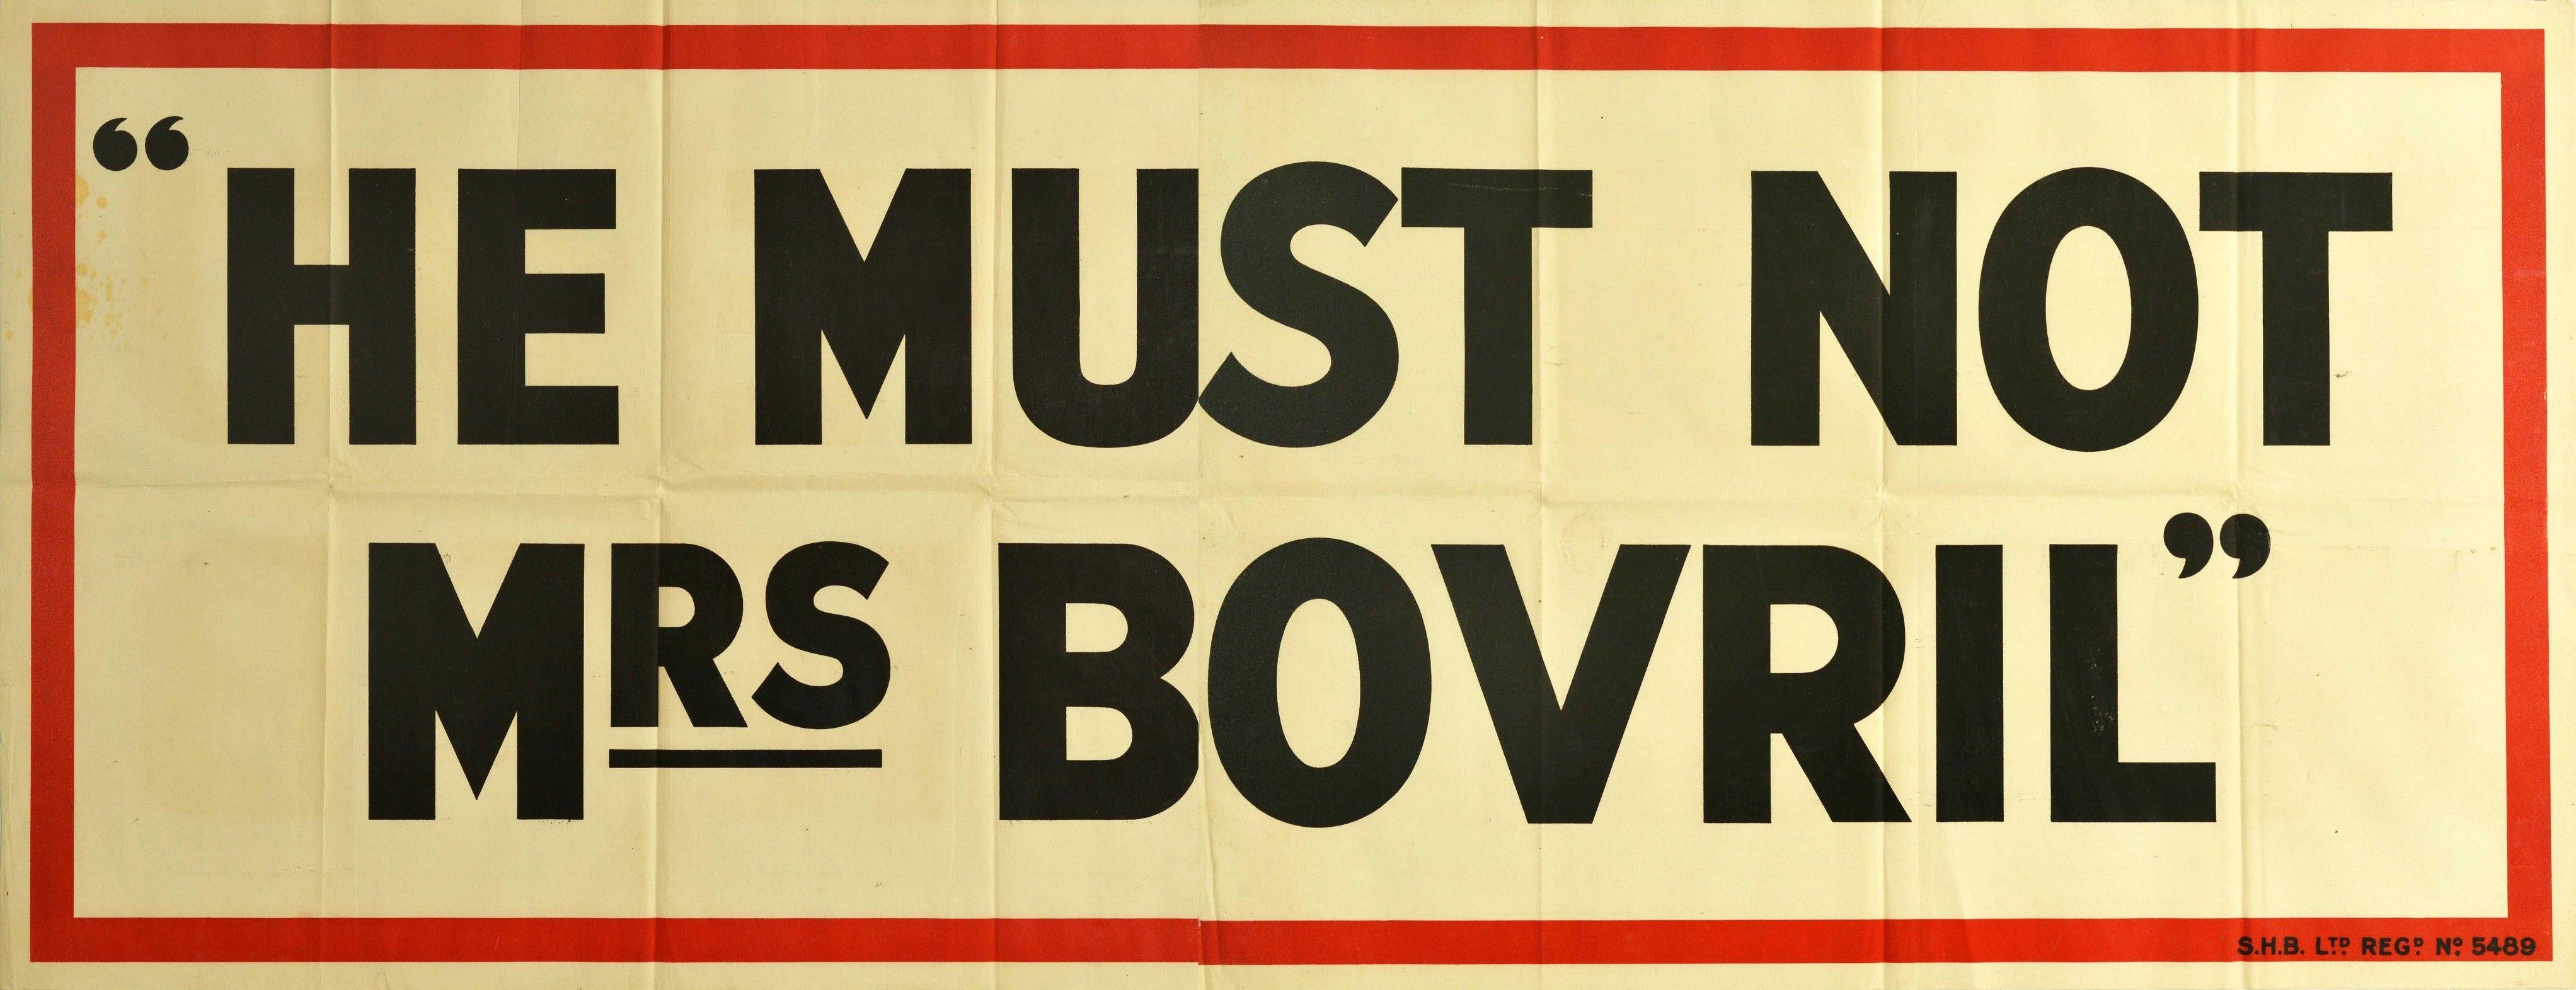 Original vintage food advertising poster for Bovril - He must not Mrs Bovril - featuring bold black lettering on a white background in a red frame border. Printed in Britain in the 1930s, this campaign used puns and word play to resemble the public